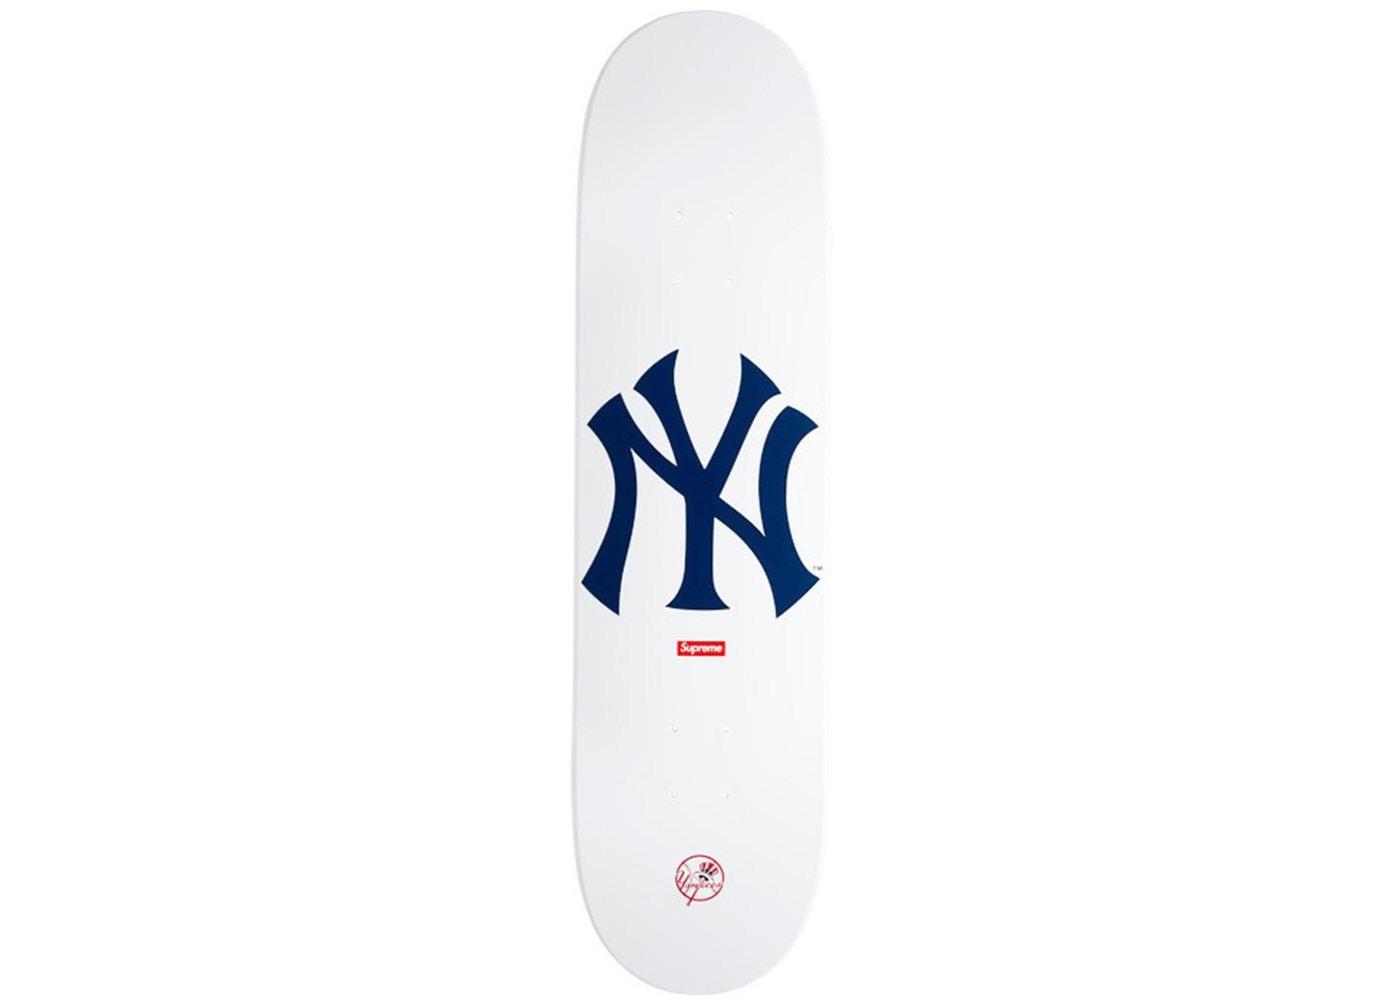 Supreme teamed up with New York Yankees for a collaborative